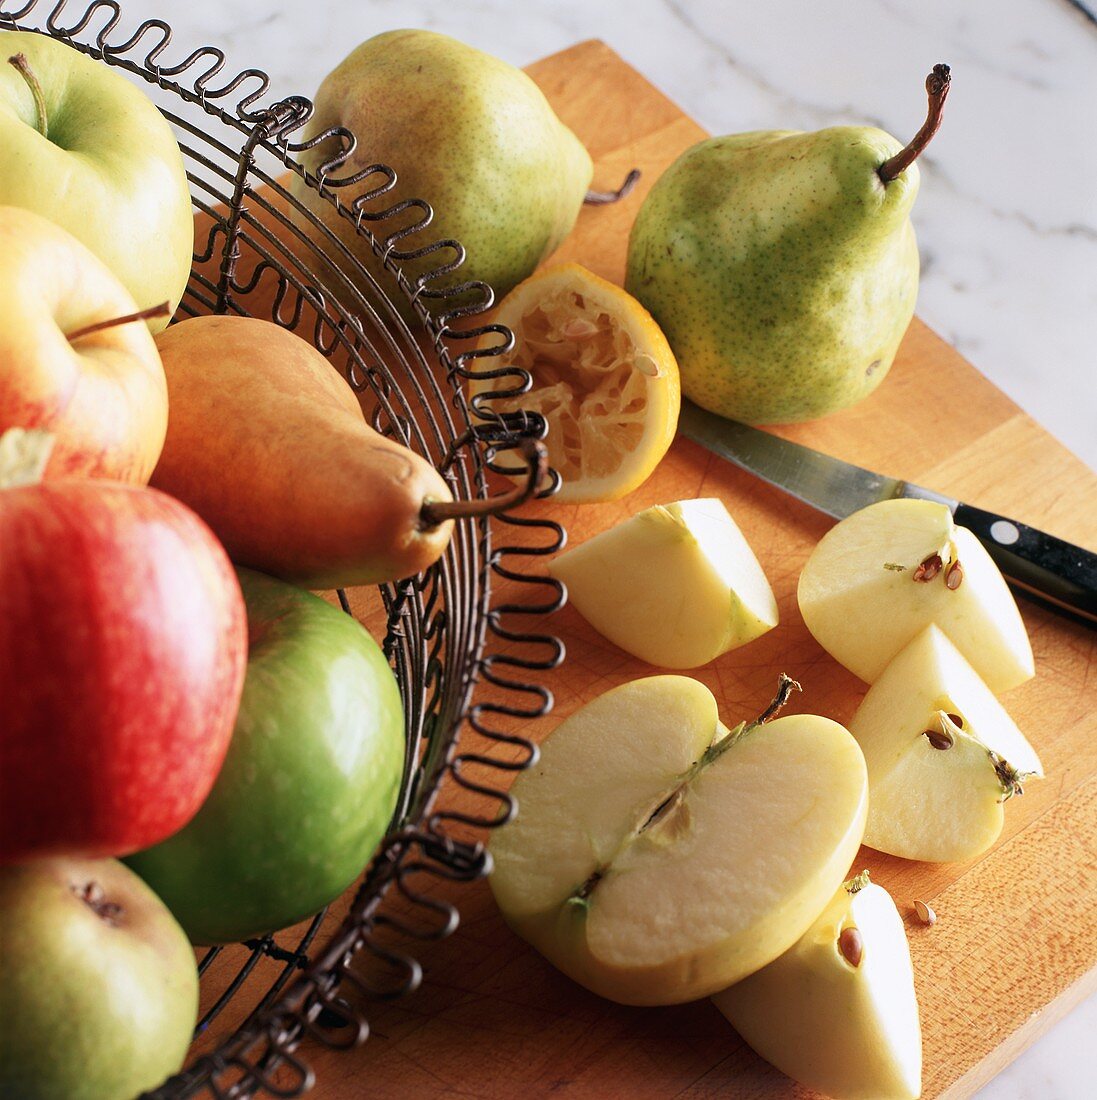 Variety of Apples and Pears with Halves